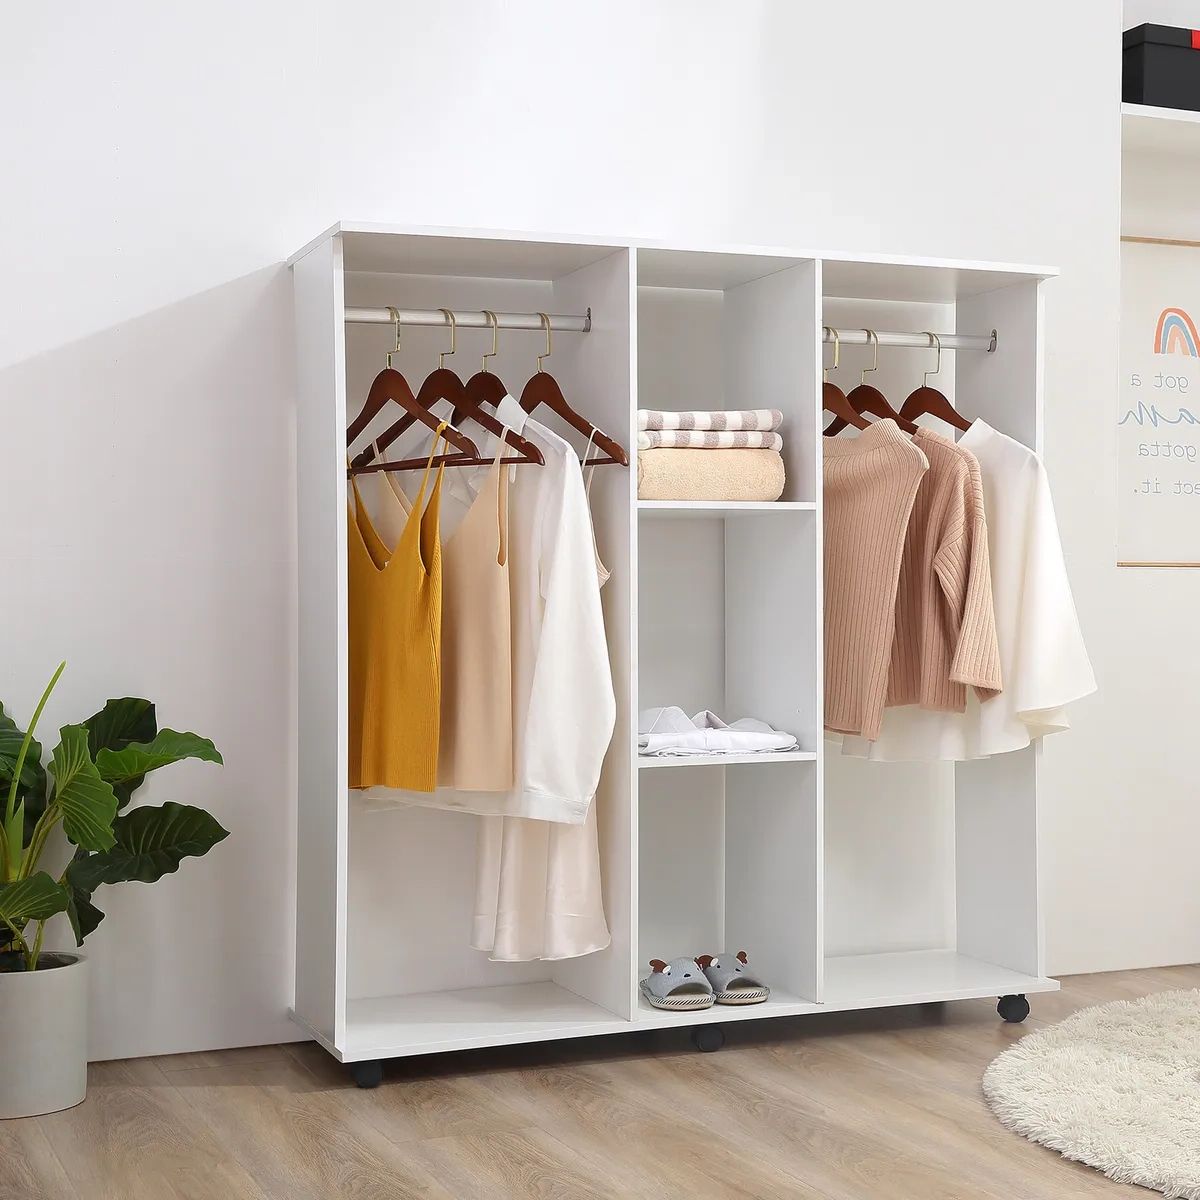 Mobile Open Wardrobe Storage Shelves Organiser W/6 Wheels Clothes Hanging  Rail 5055974897557 | Ebay Inside Wardrobes With Double Hanging Rail (Gallery 5 of 20)